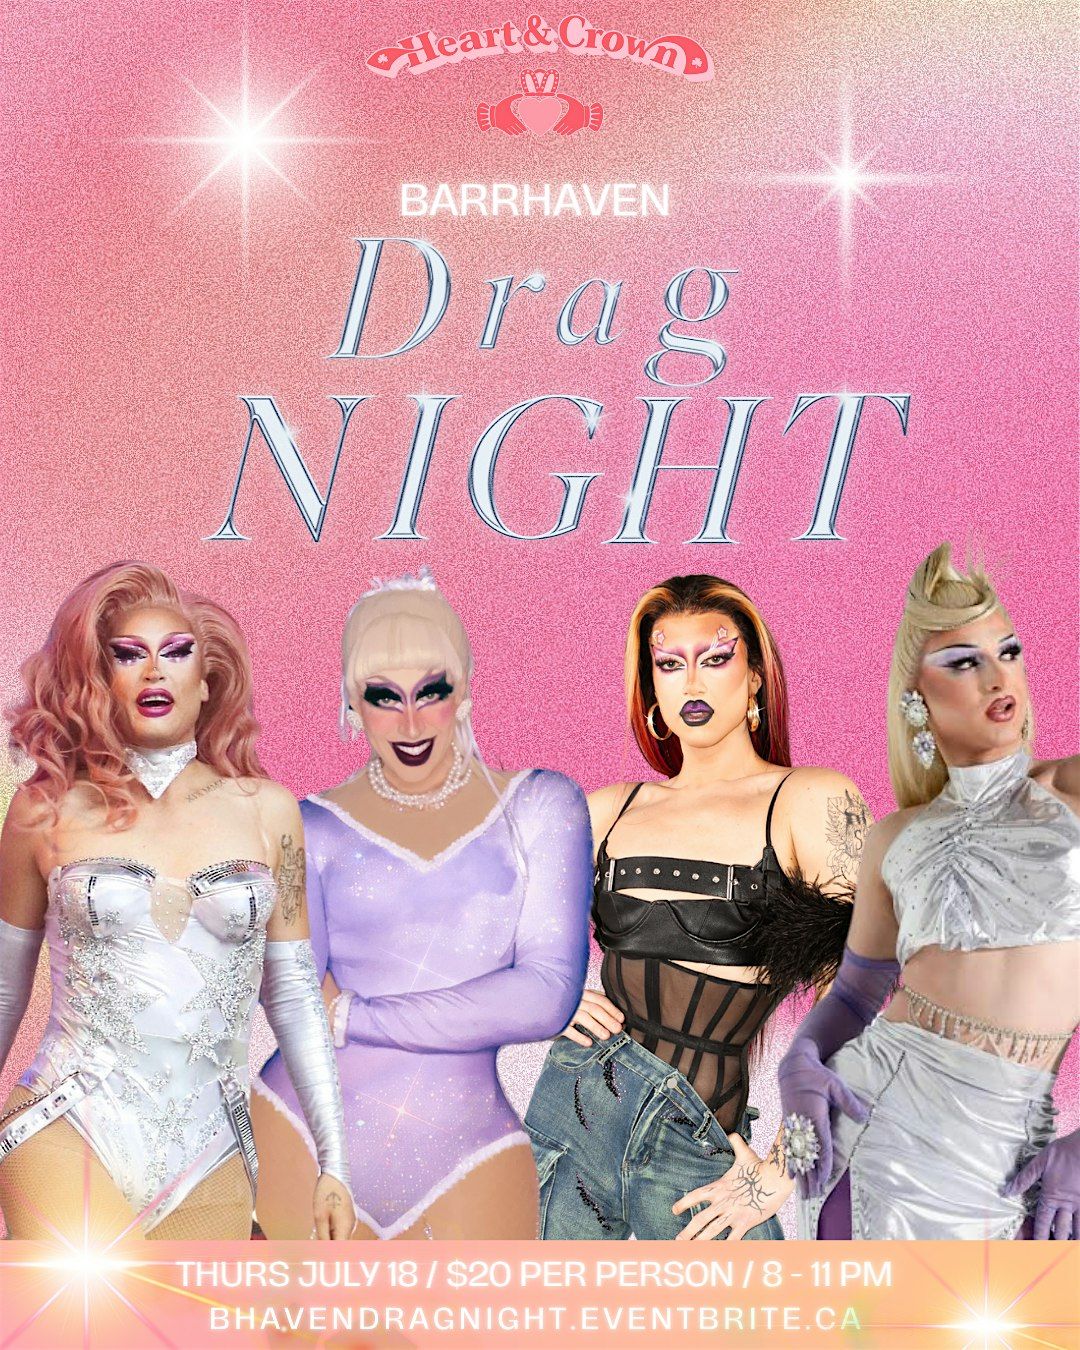 Barrhaven Drag Night at the Heart n Crown!